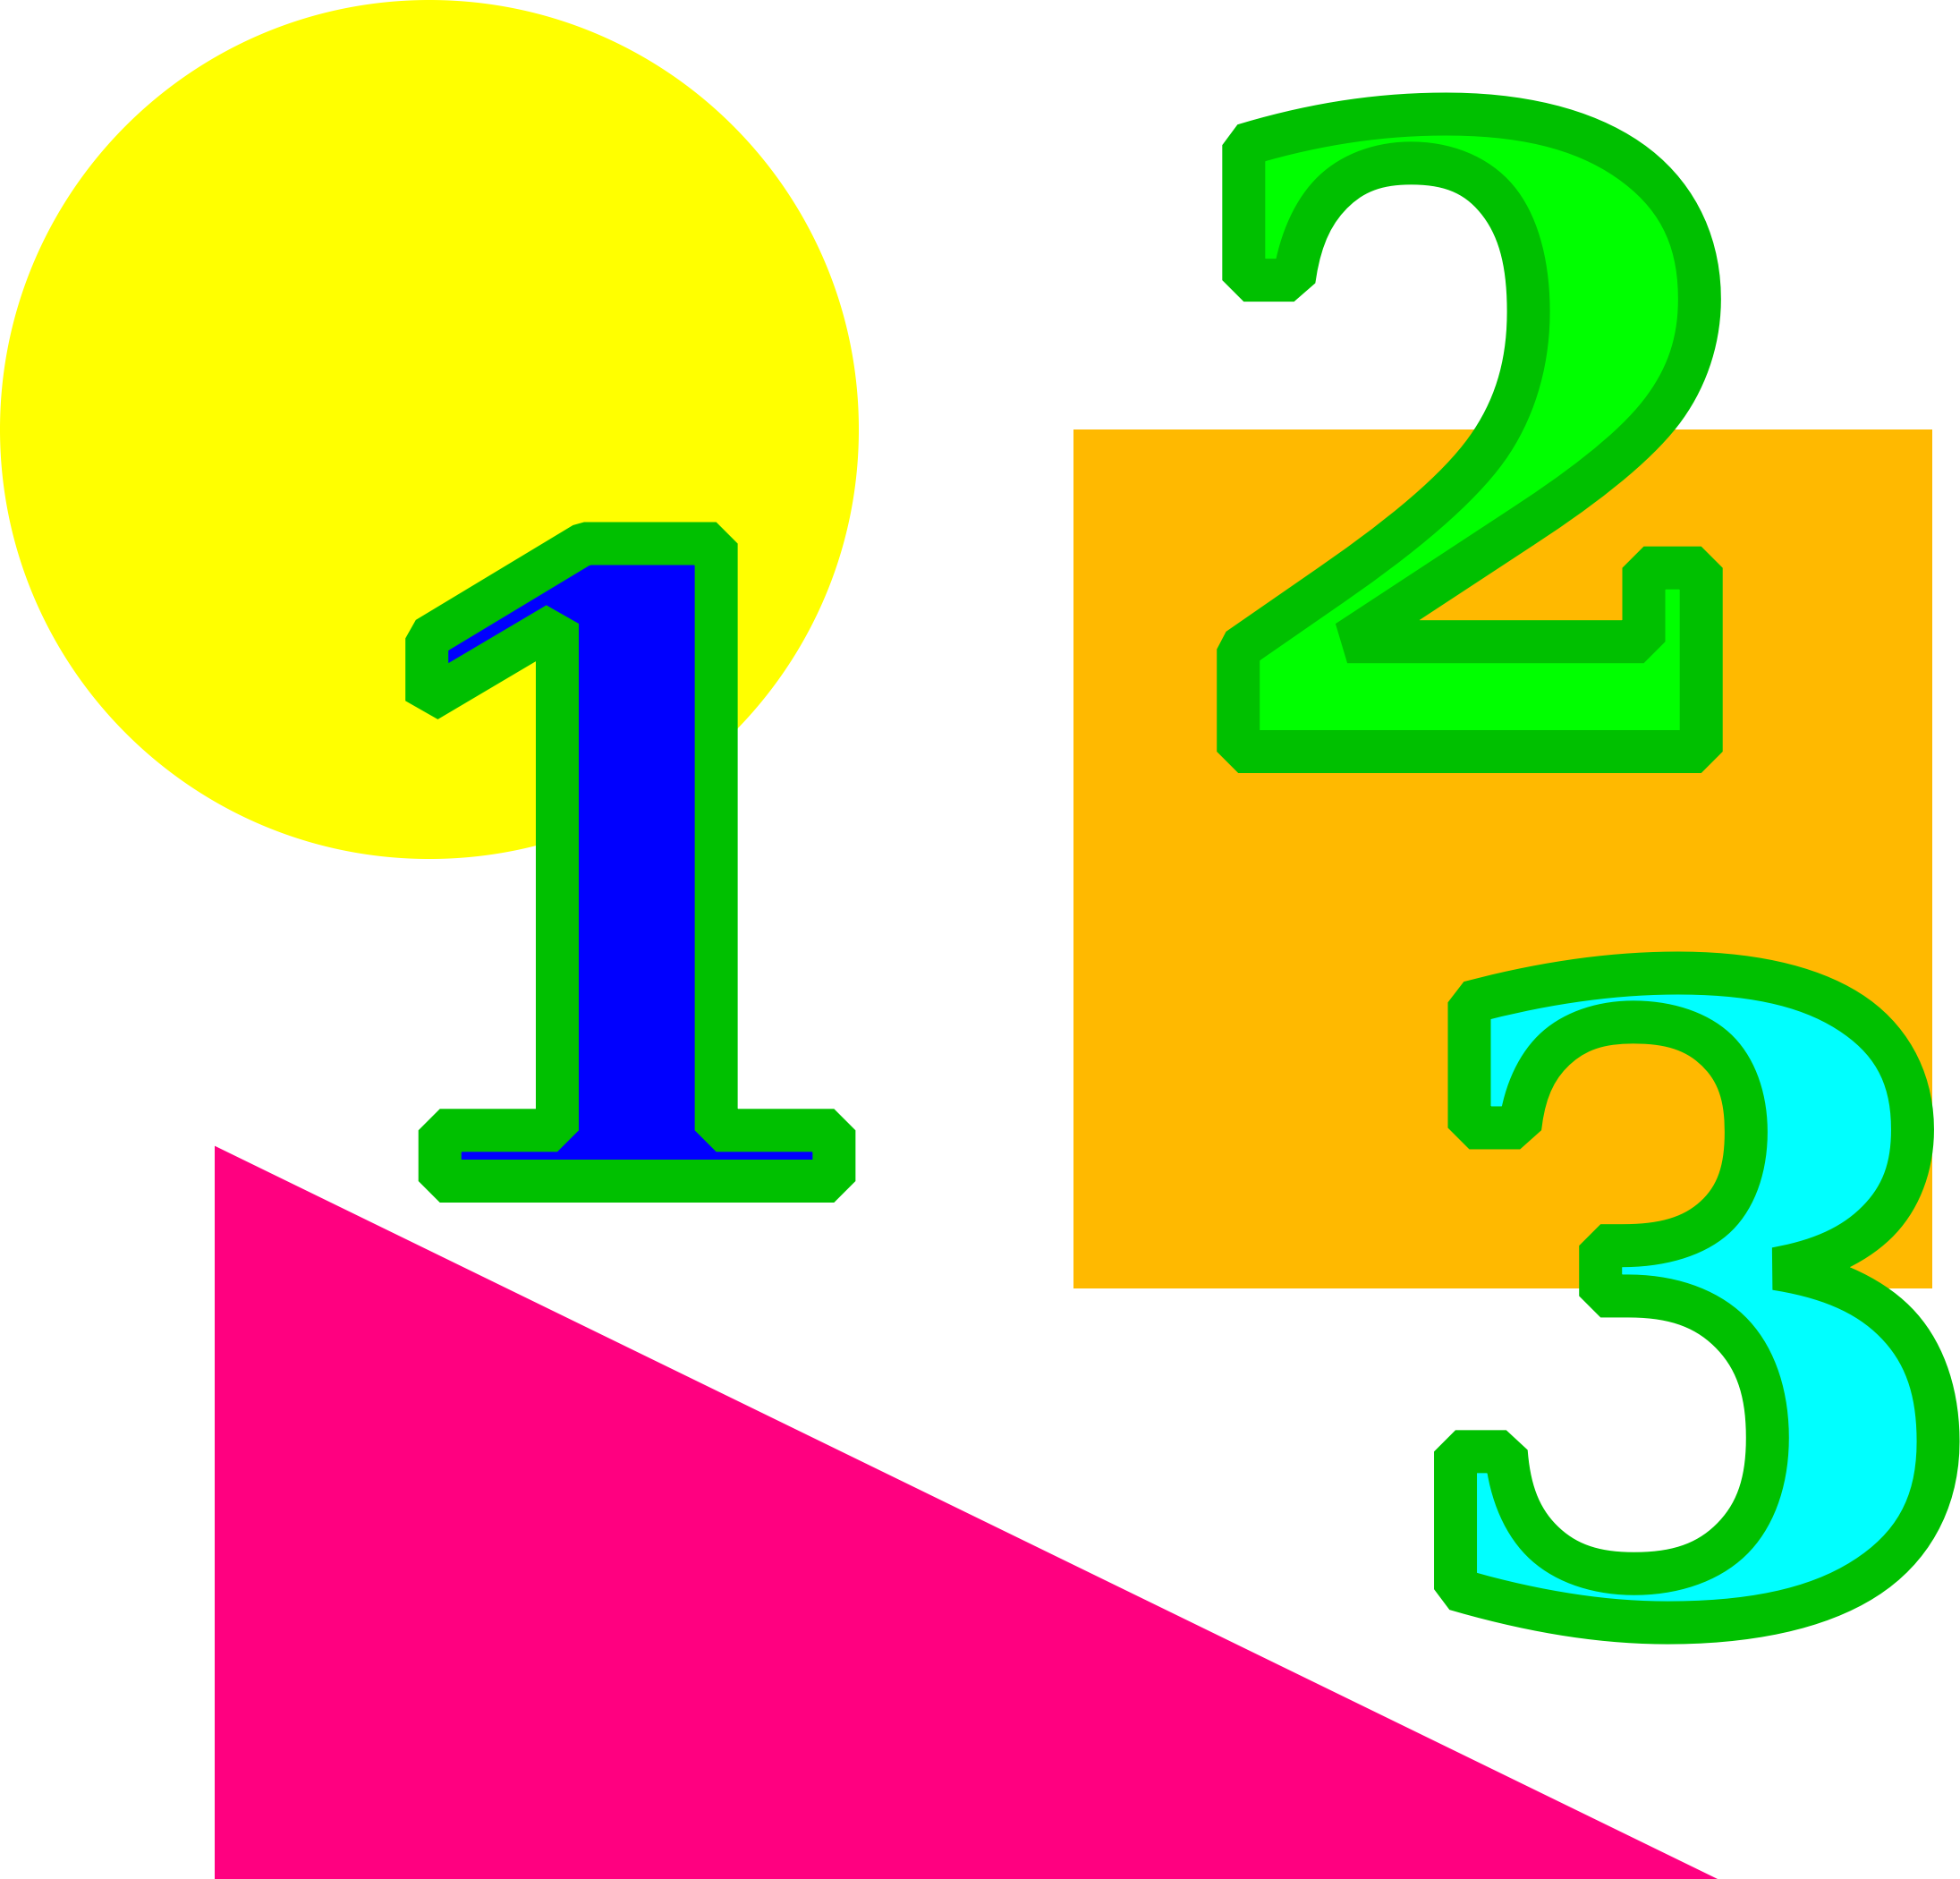 A Colorful Numbers And A Circle